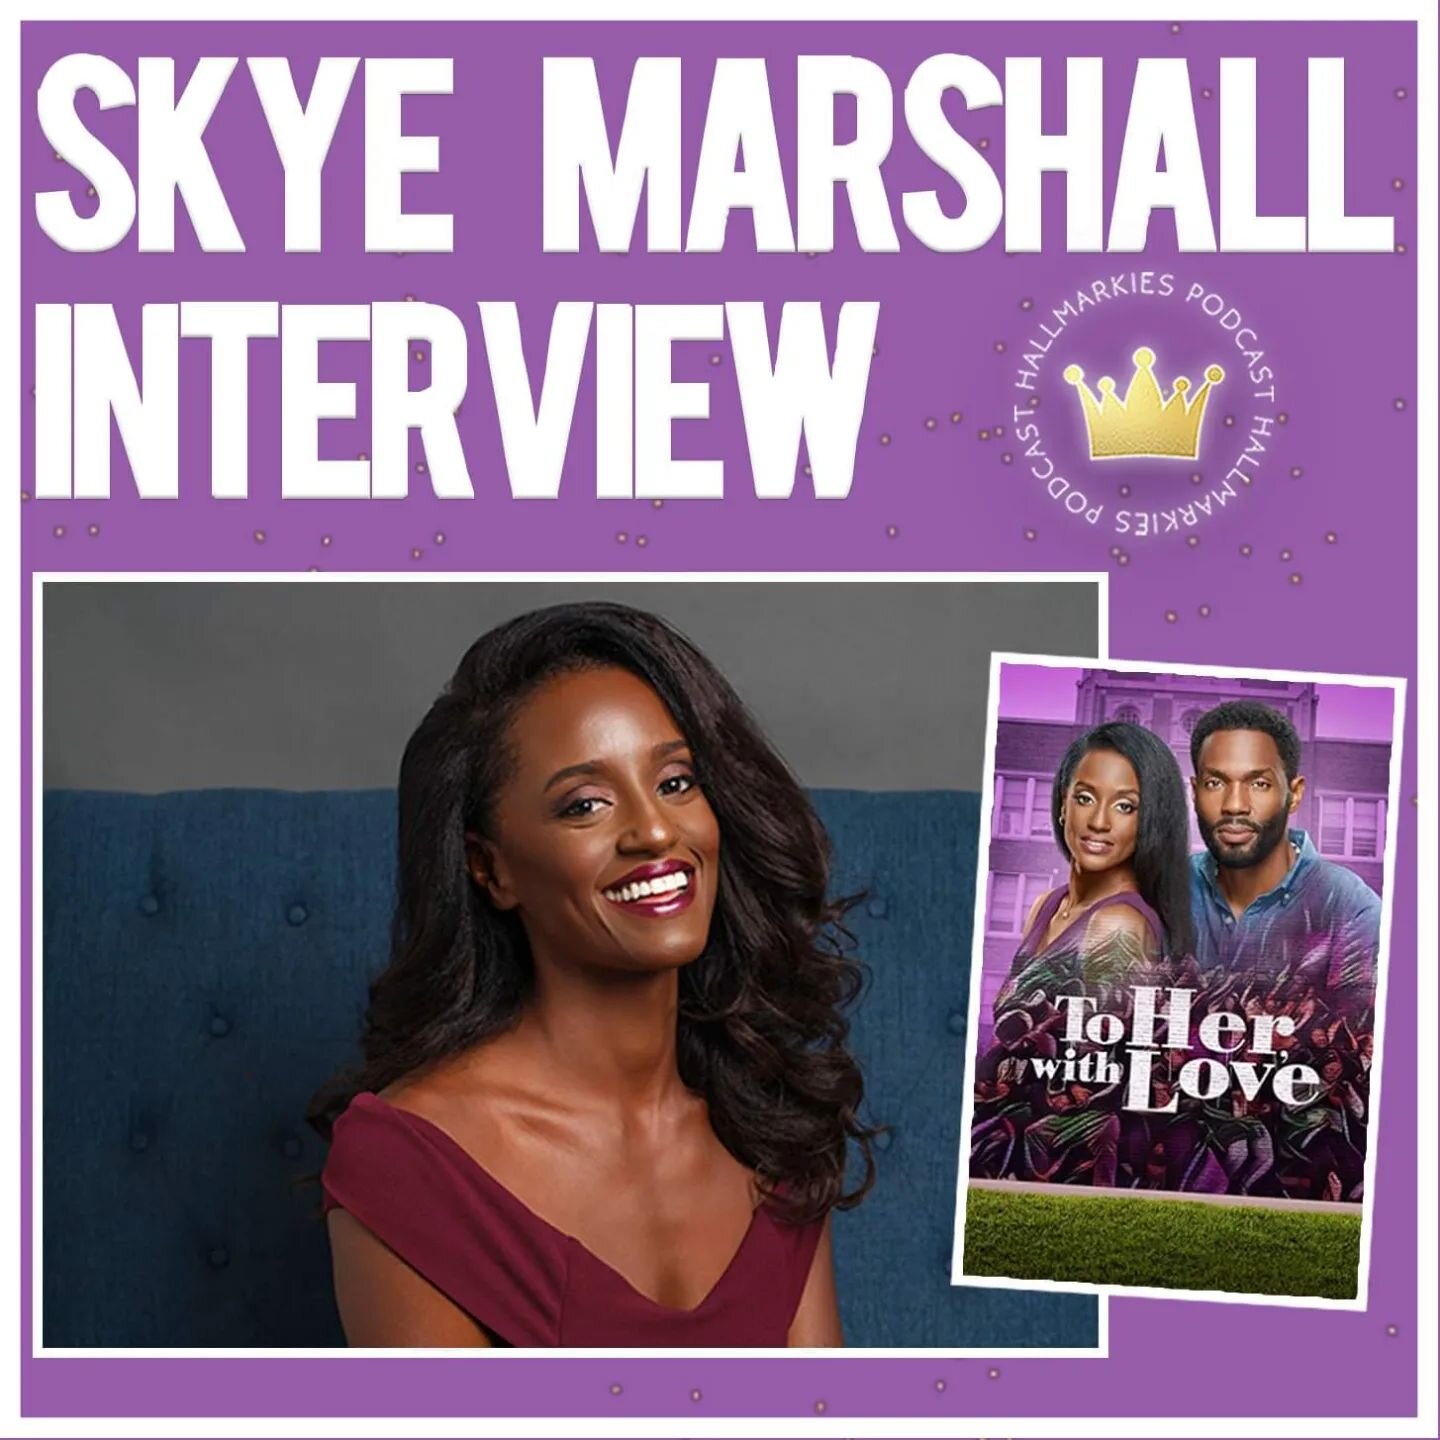 You all will love this interview! Skye Marshall Interview (To Her, With Love) 

Available wherever you listen to podcasts #toherwithlove #hallmarkies @bree.unabashedly
@skyepmarshall @rachels_reviews

Link in Bio 
YT: https://youtu.be/7iwiZoeZOSg
Aud